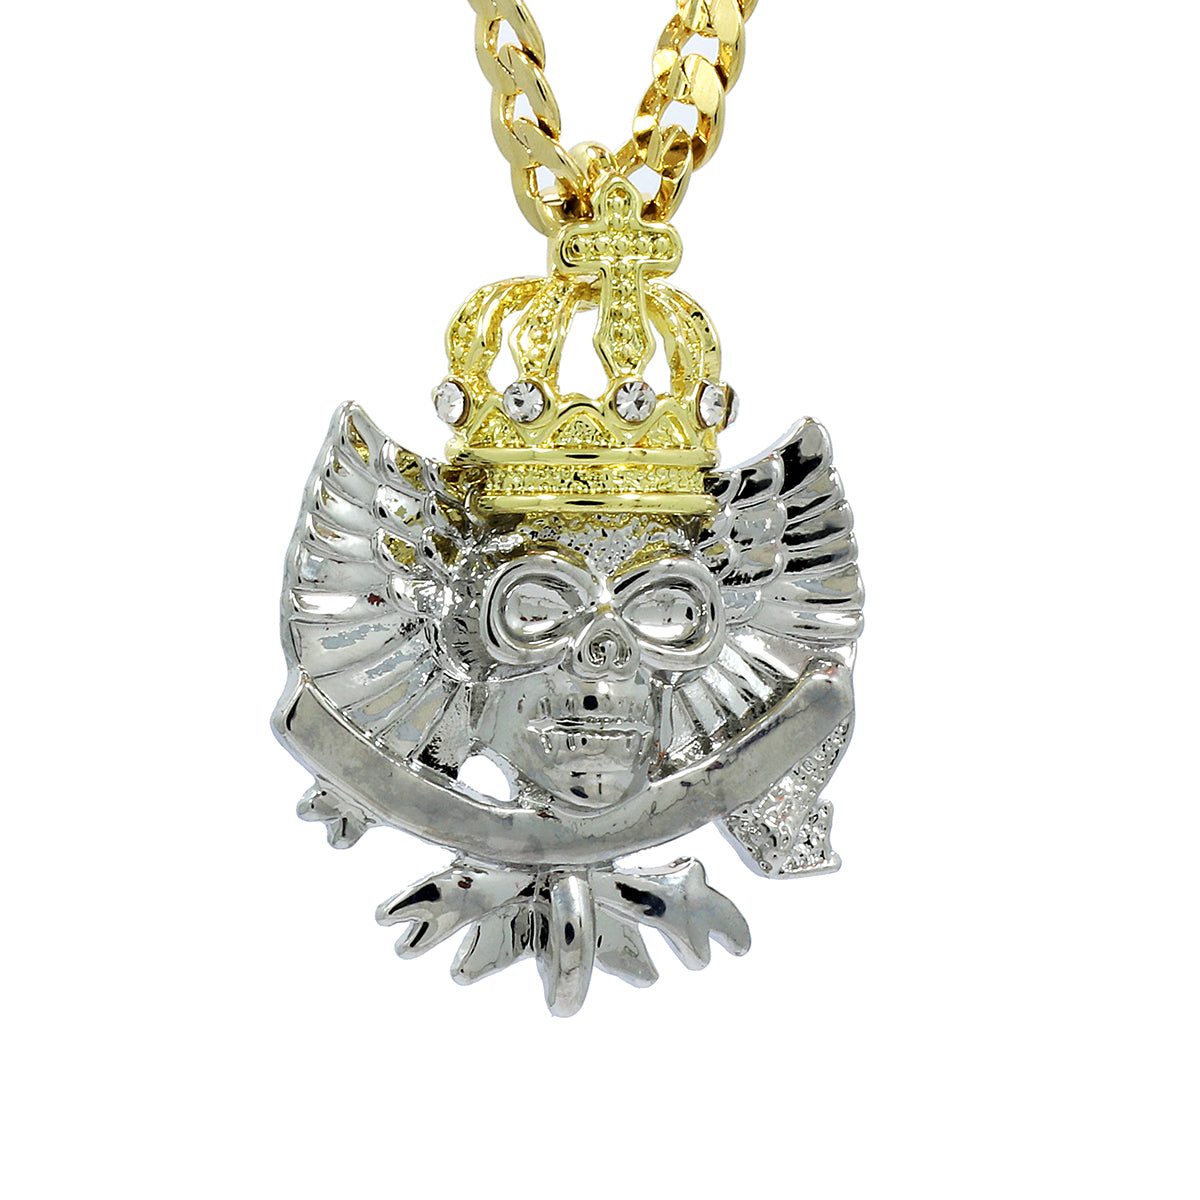 The Crowned Skull Necklace